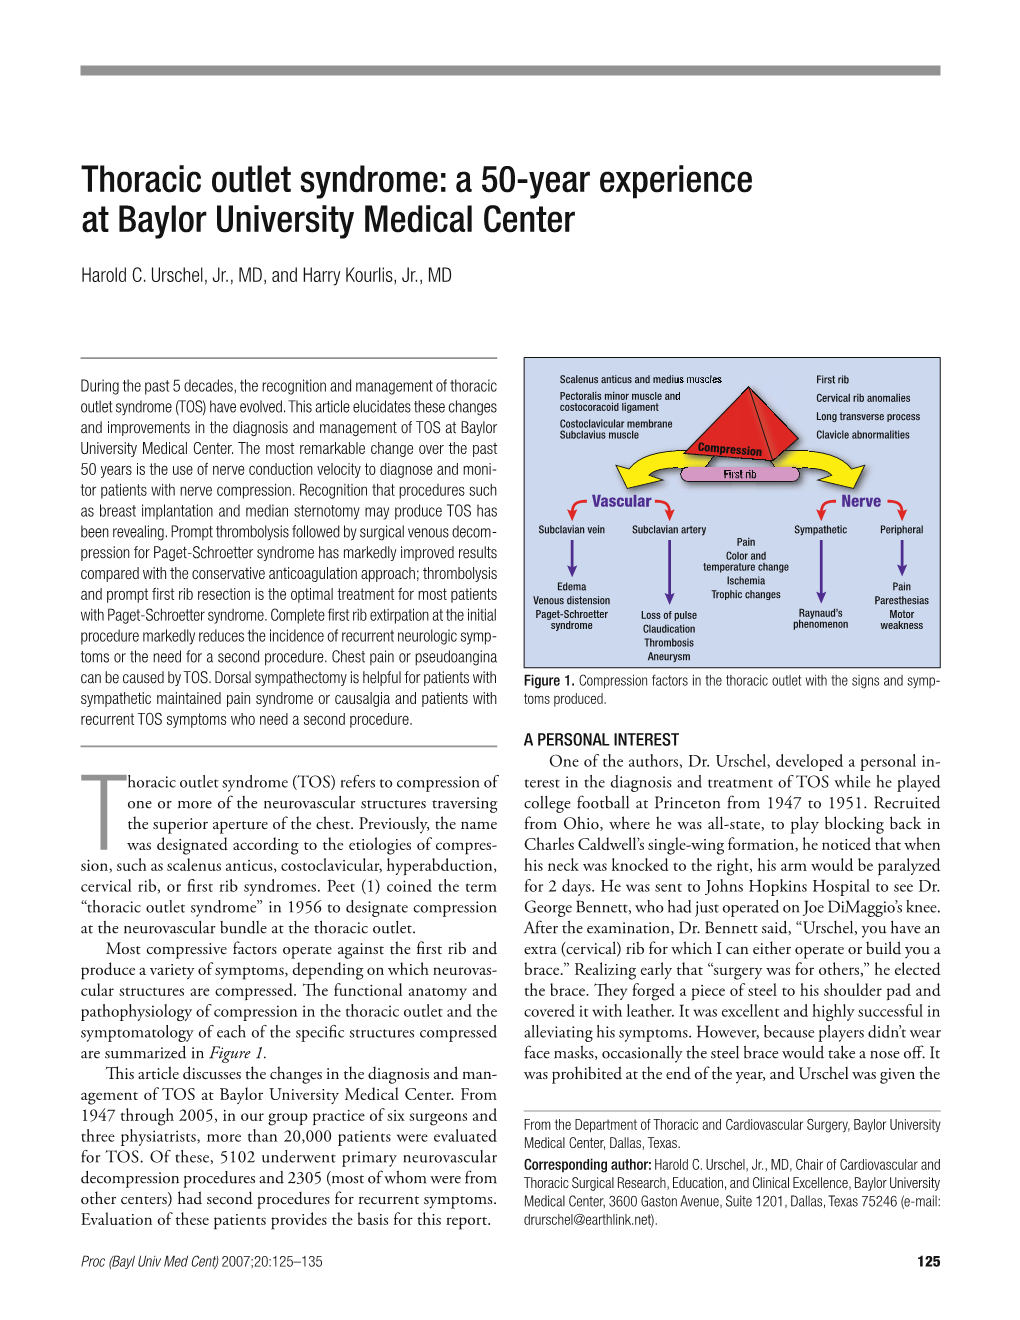 Thoracic Outlet Syndrome: a 50-Year Experience at Baylor University Medical Center